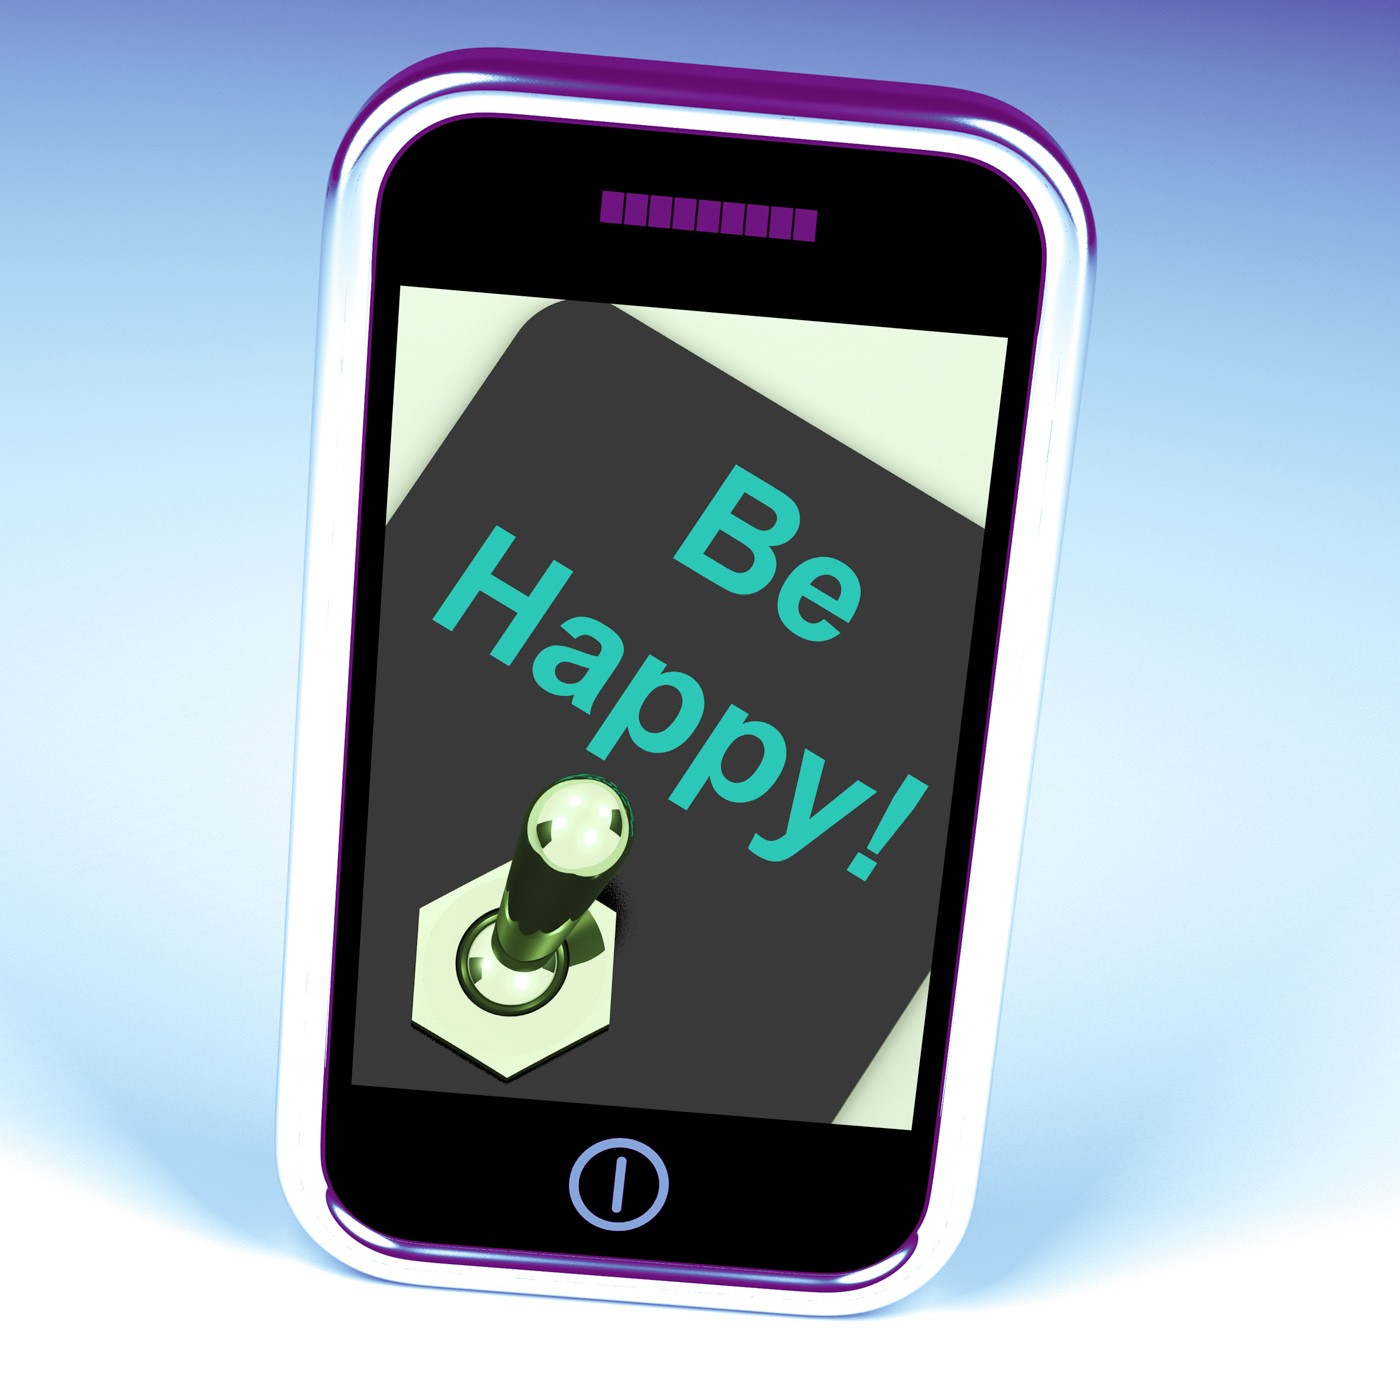 Be happy phone shows happiness or enjoyment photo